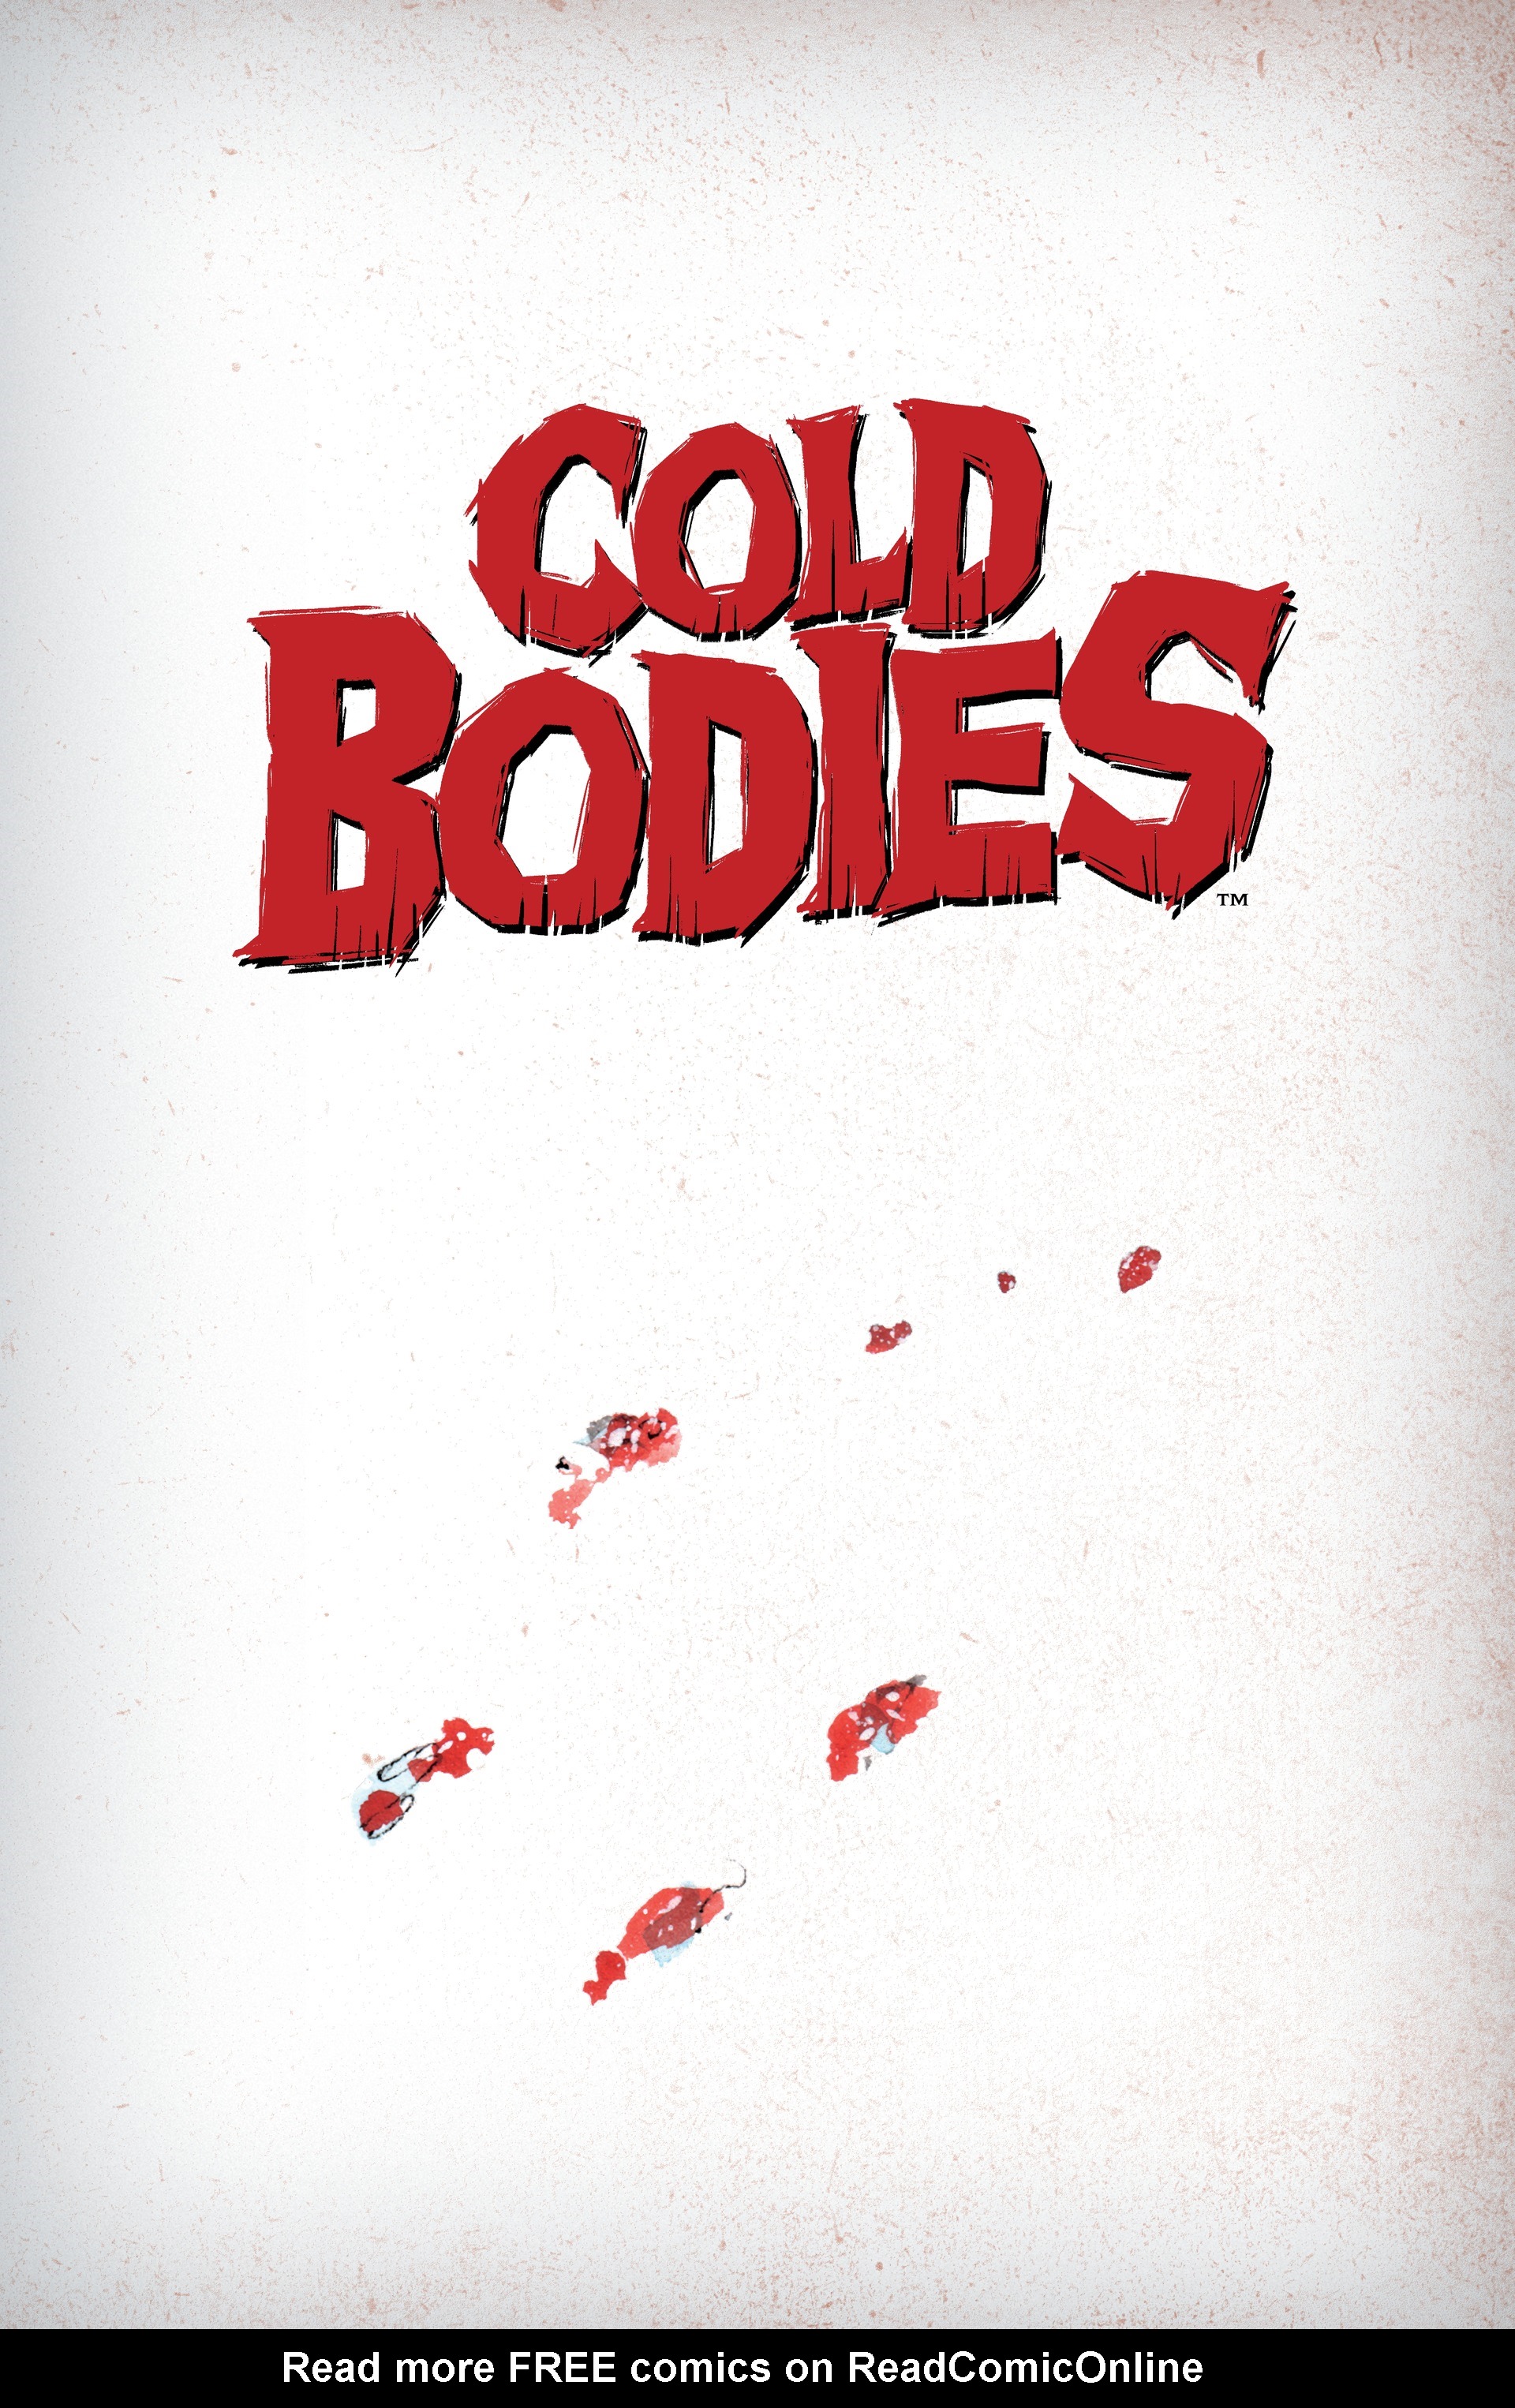 Read online Cold Bodies comic -  Issue # TPB - 3